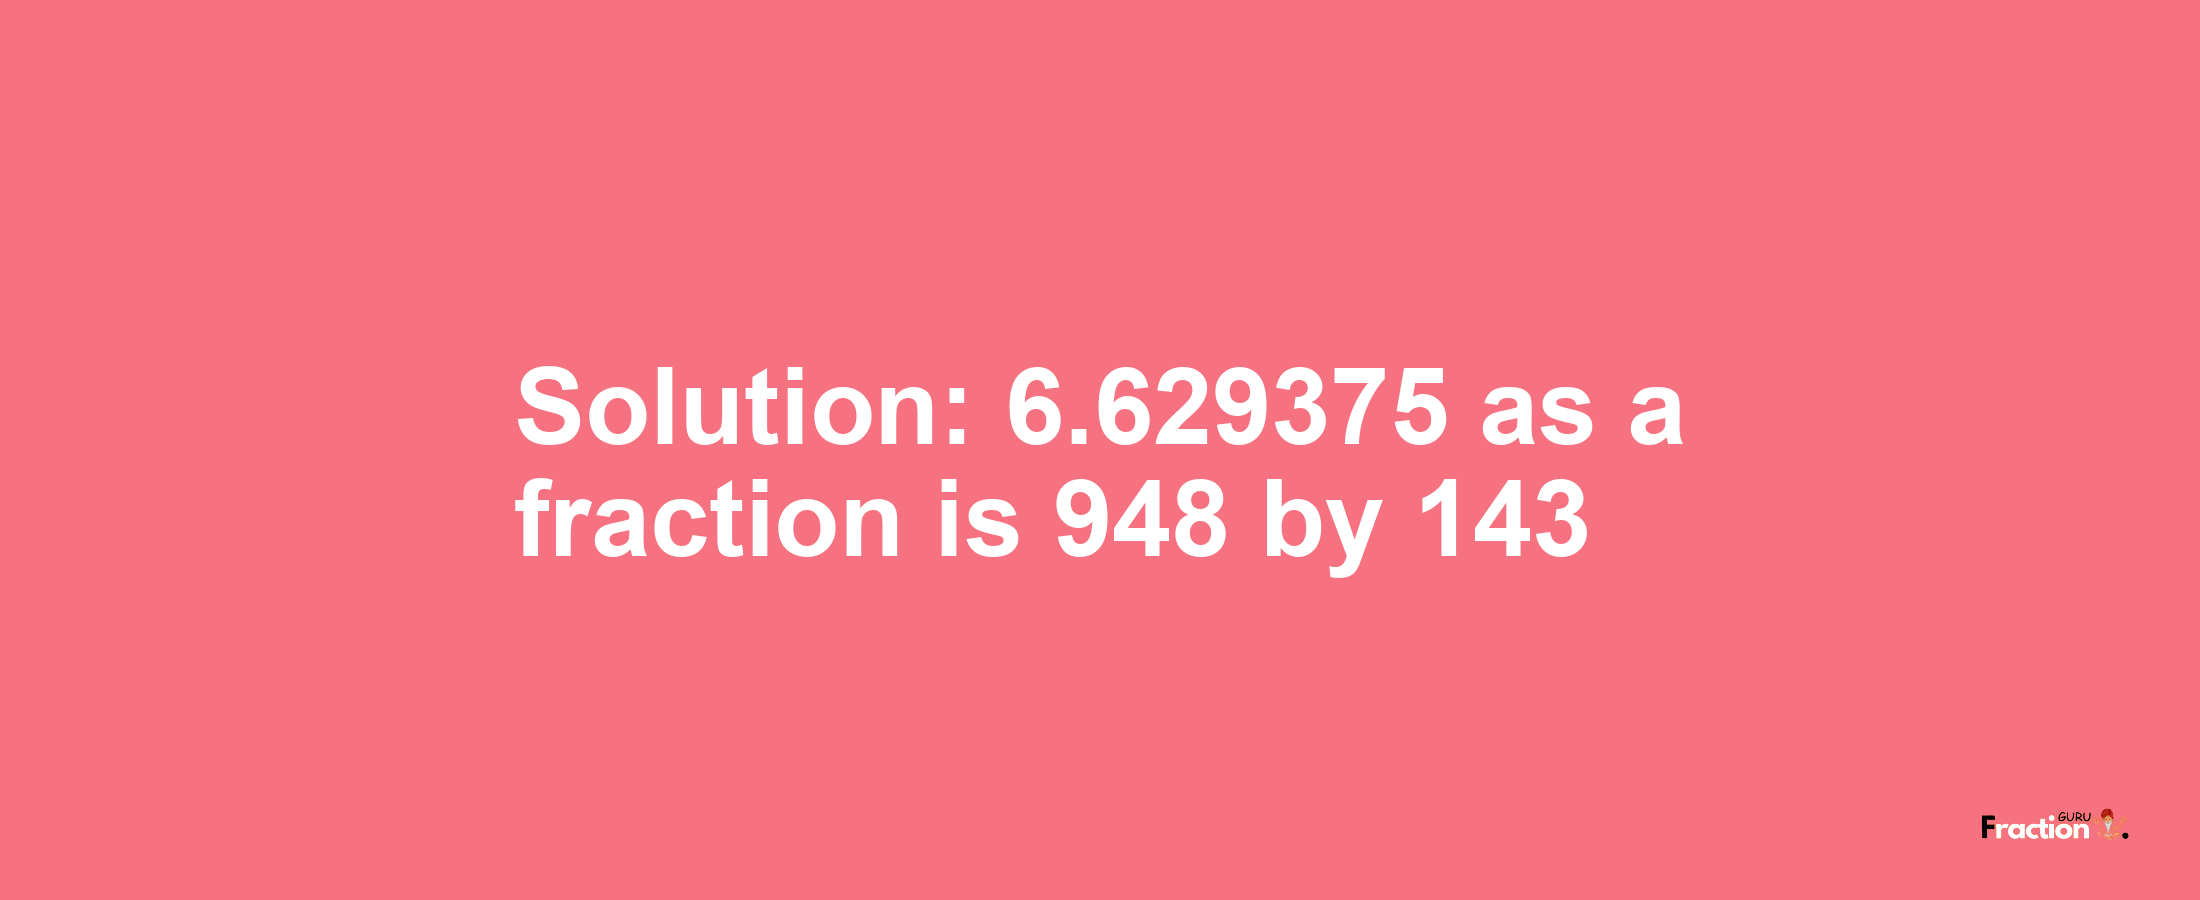 Solution:6.629375 as a fraction is 948/143